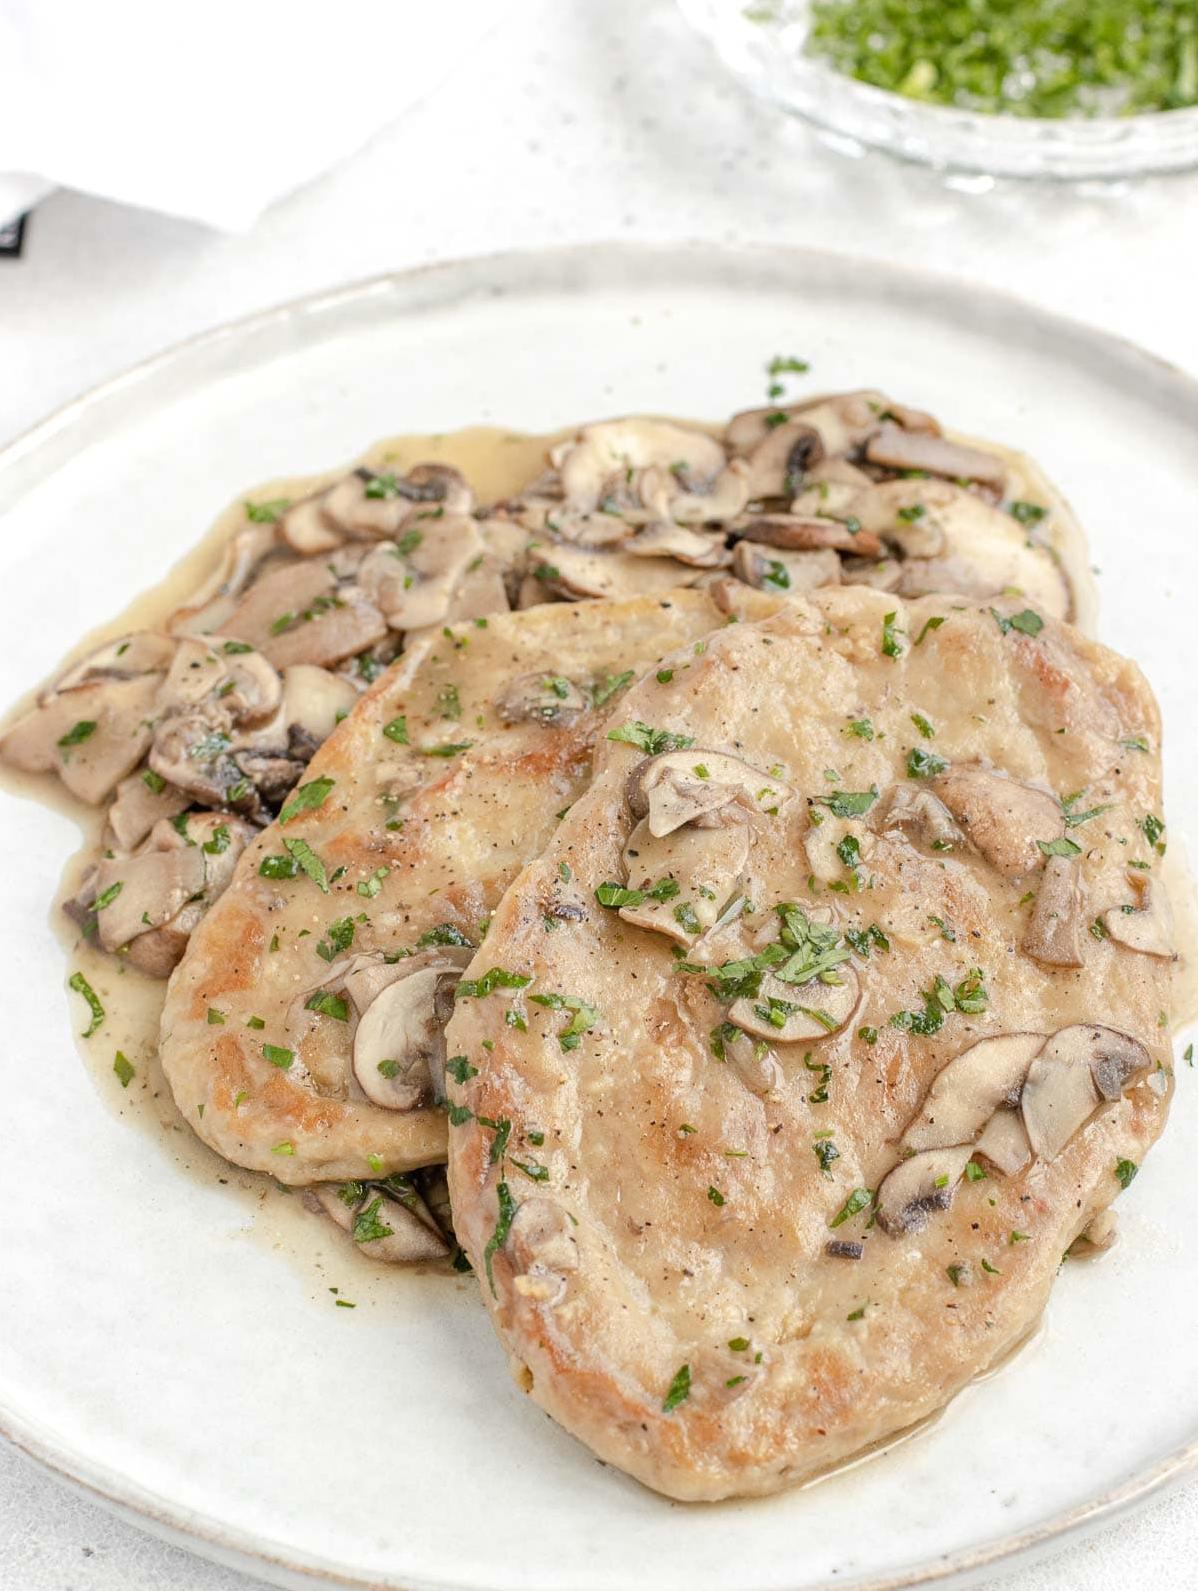  This mushroom wine sauce will elevate your seitan steaks to the next level.